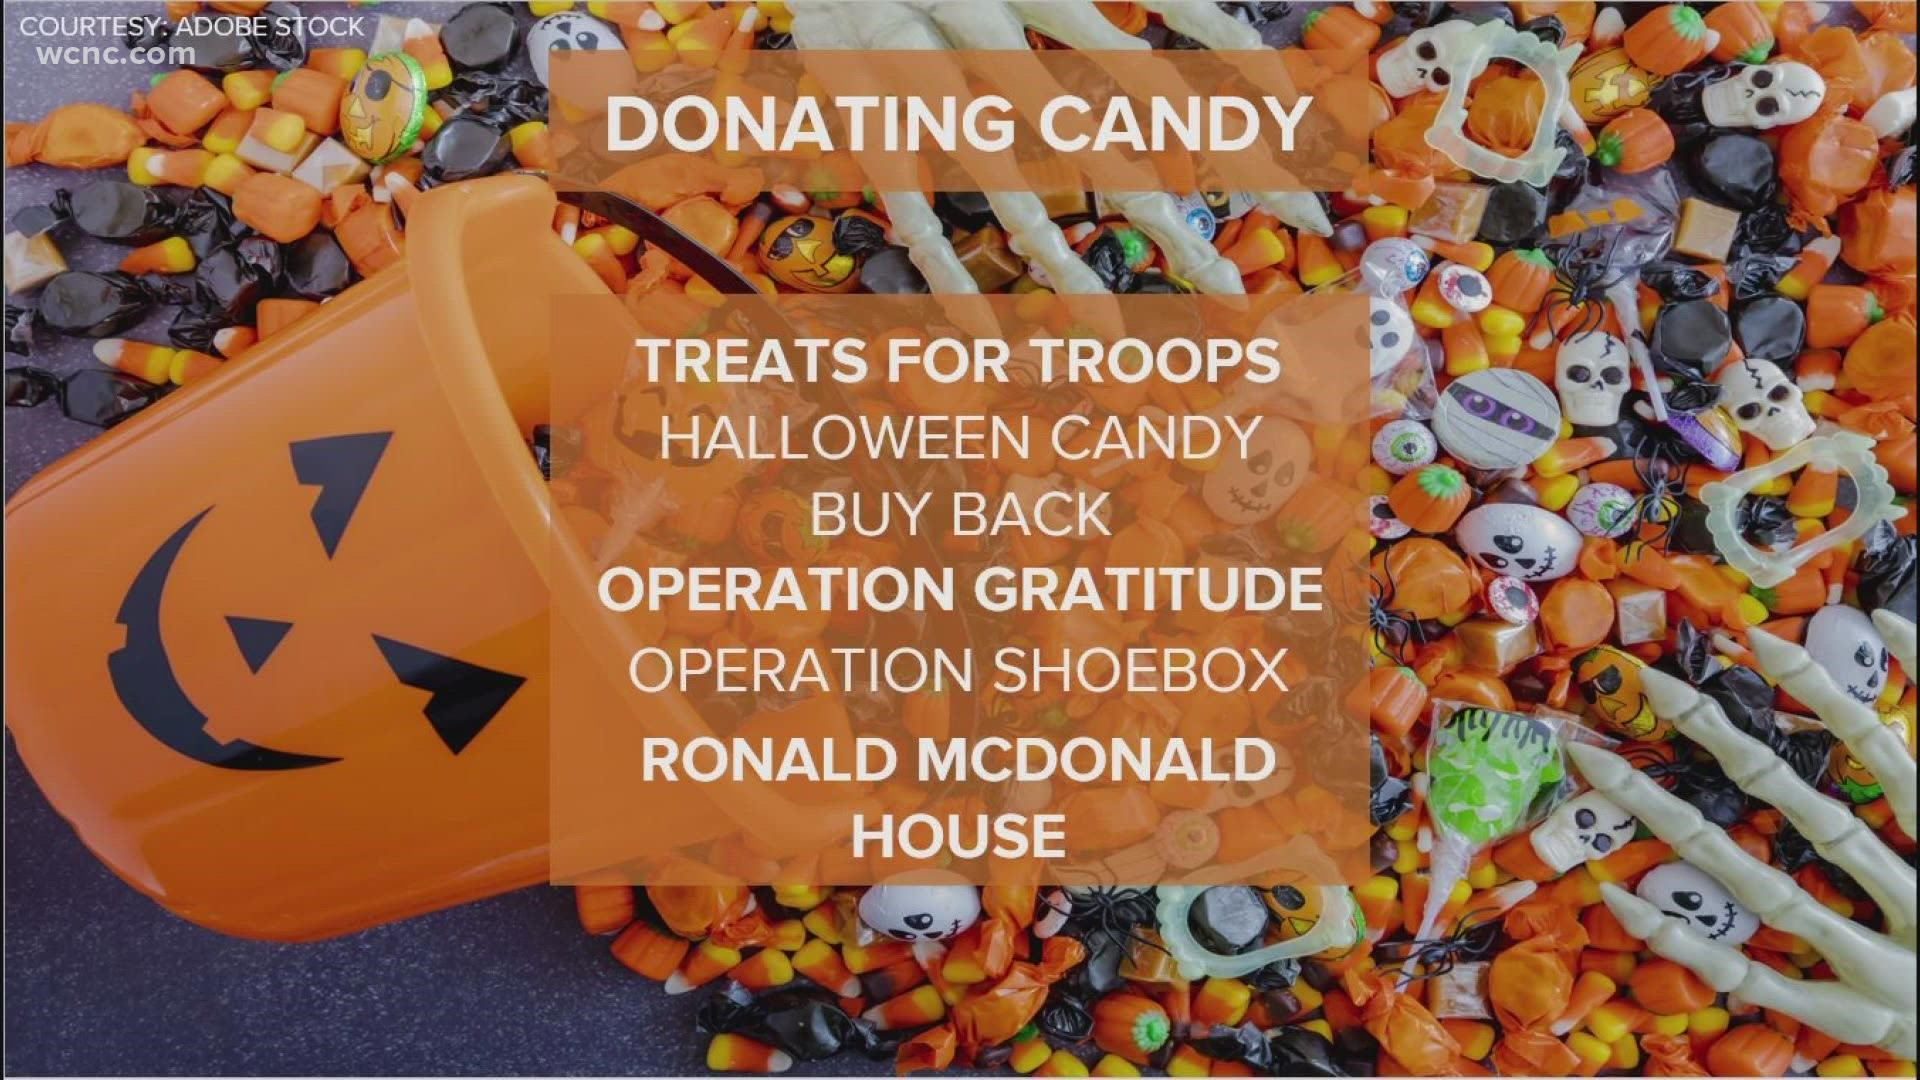 If you have extra or unwanted candy from your Halloween trick-or-treat haul, don't throw it away. Instead, donate it to charity.